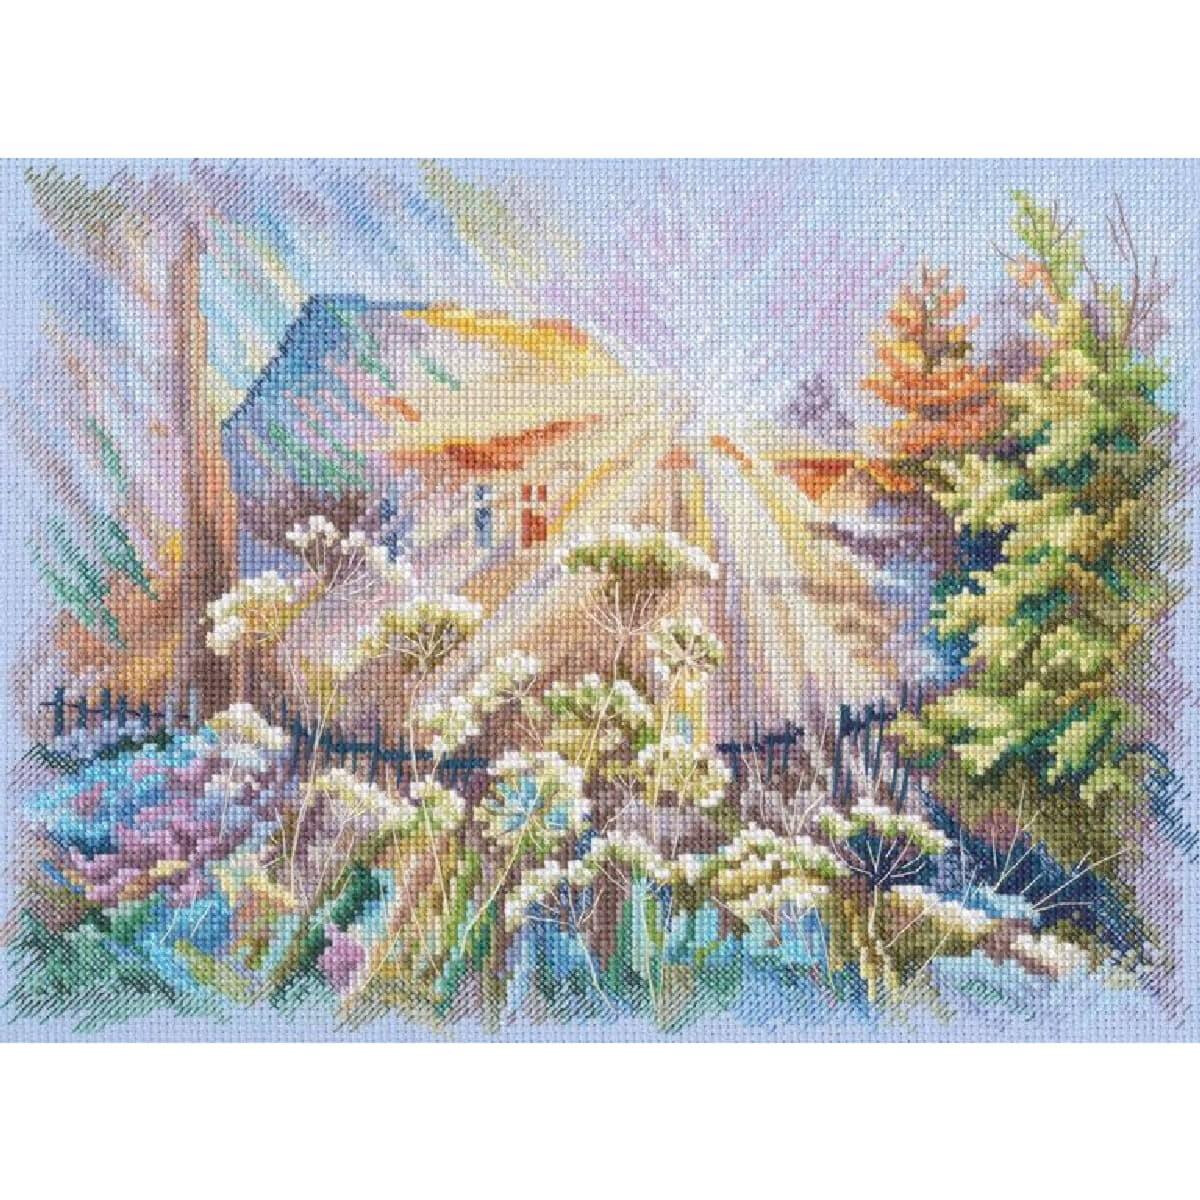 RTO counted cross stitch kit "In the rays of the...